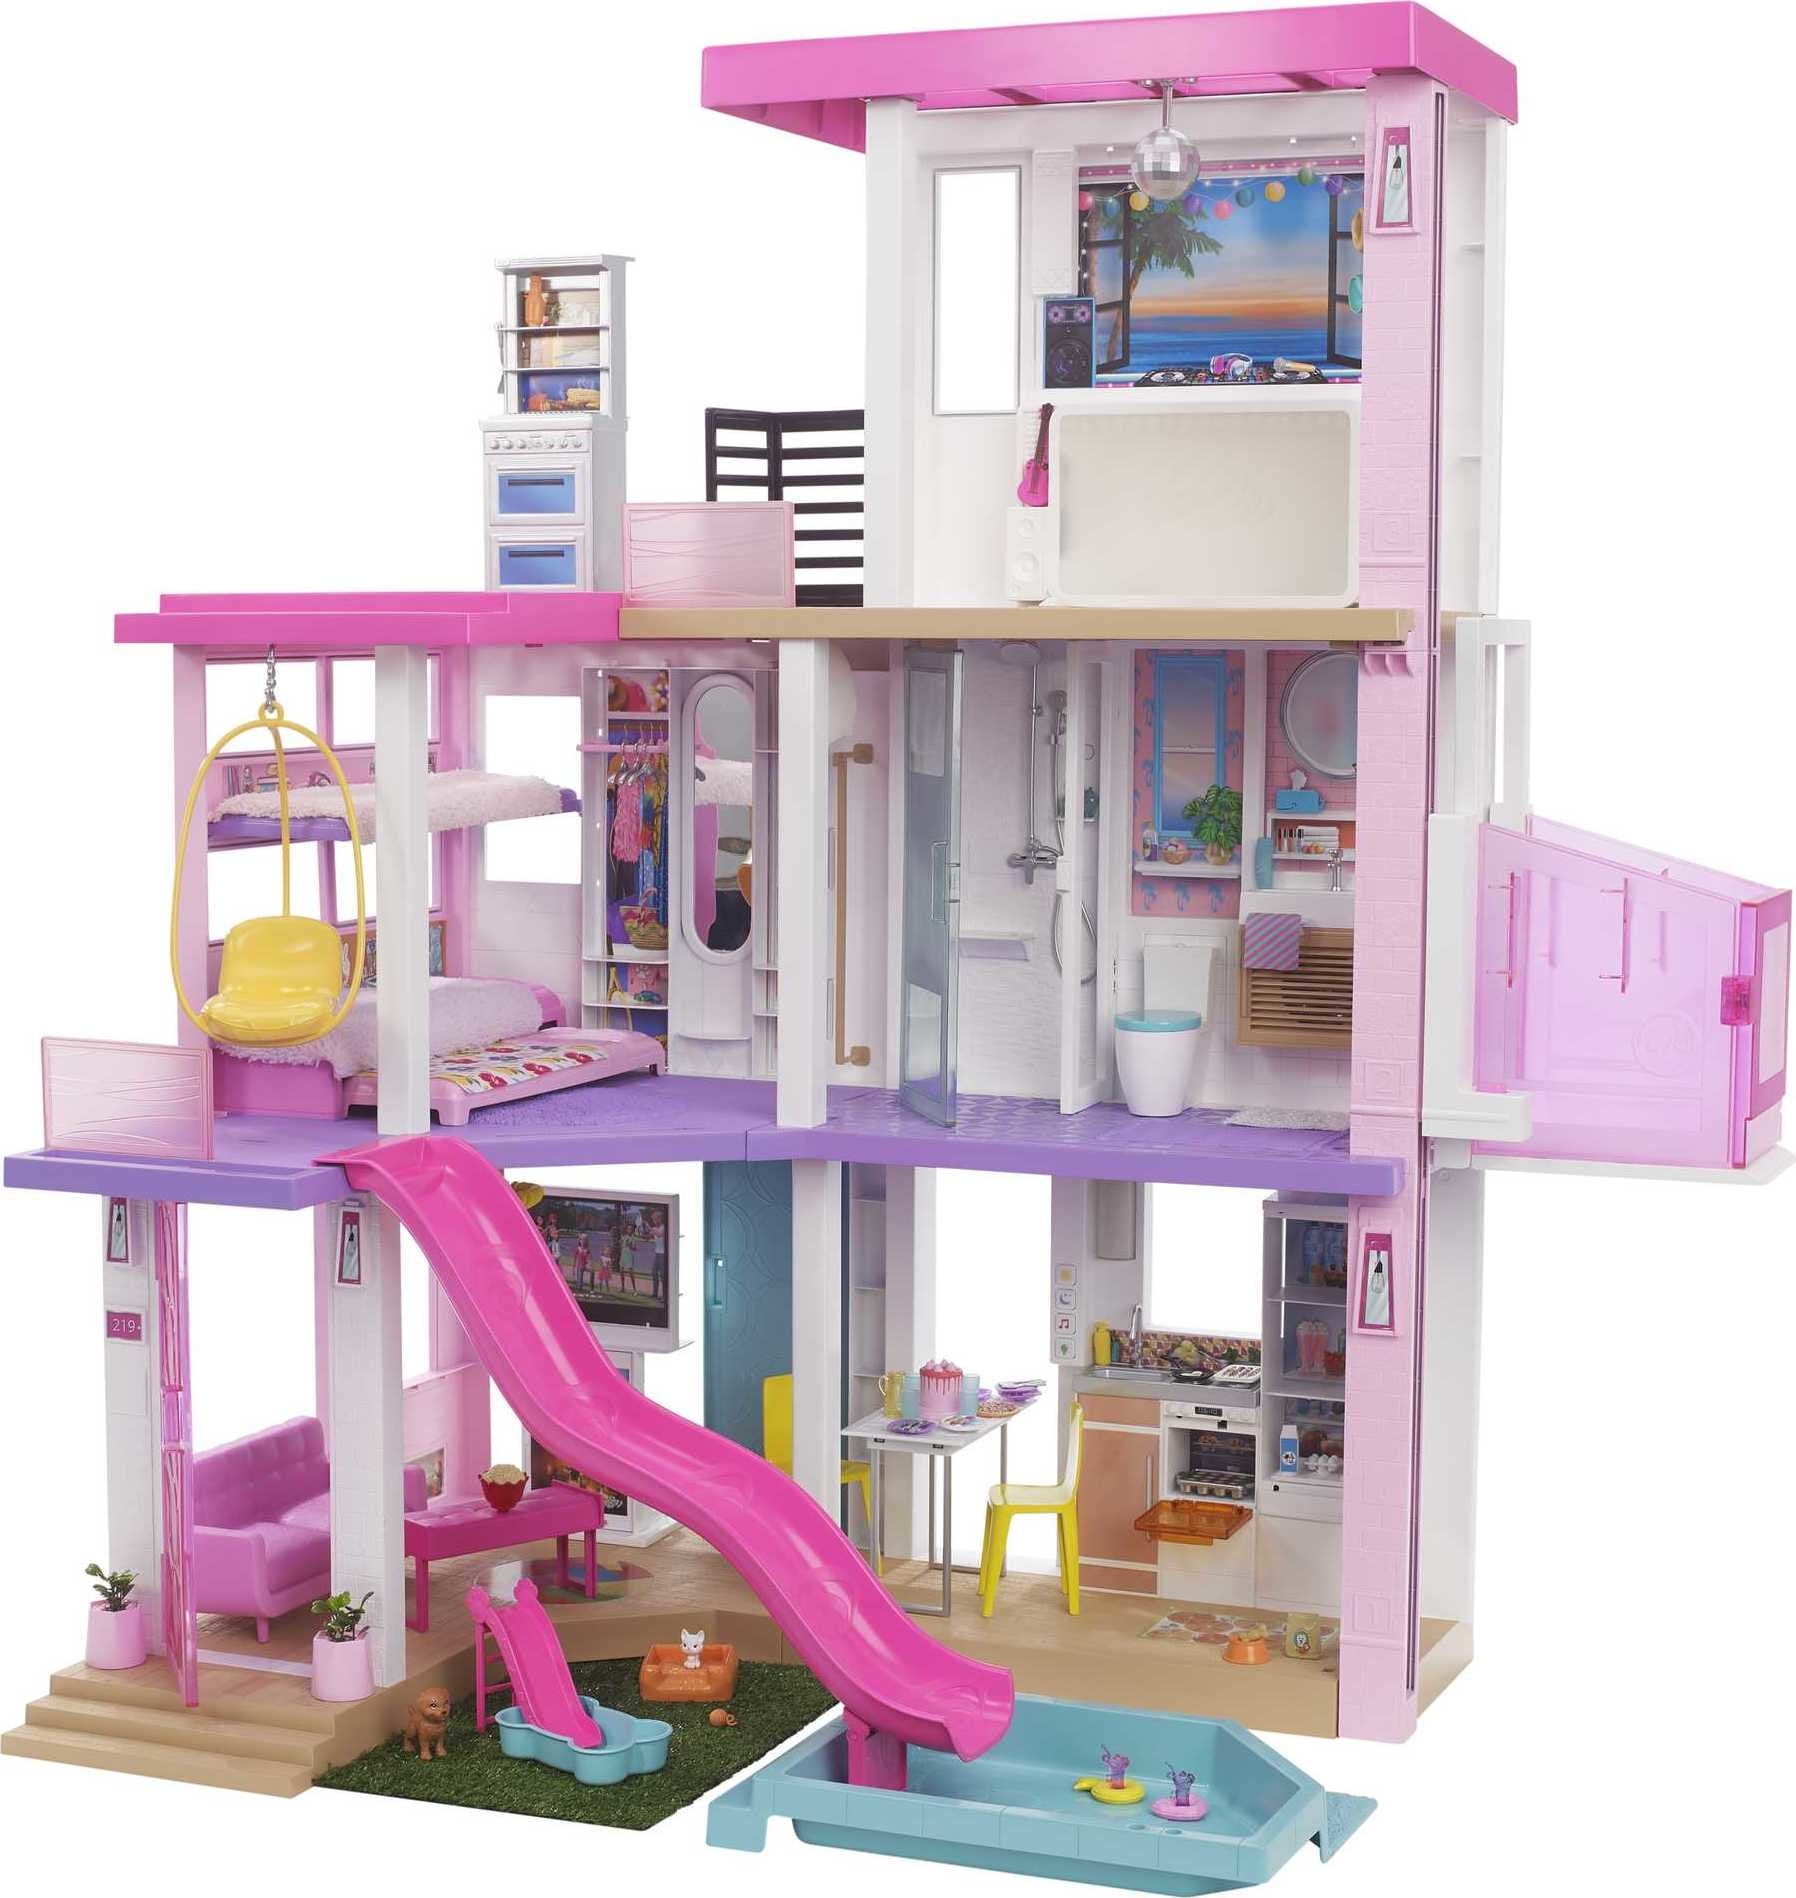 New Barbie Size Dollhouse Furniture Classroom Play Set Free Shipping 